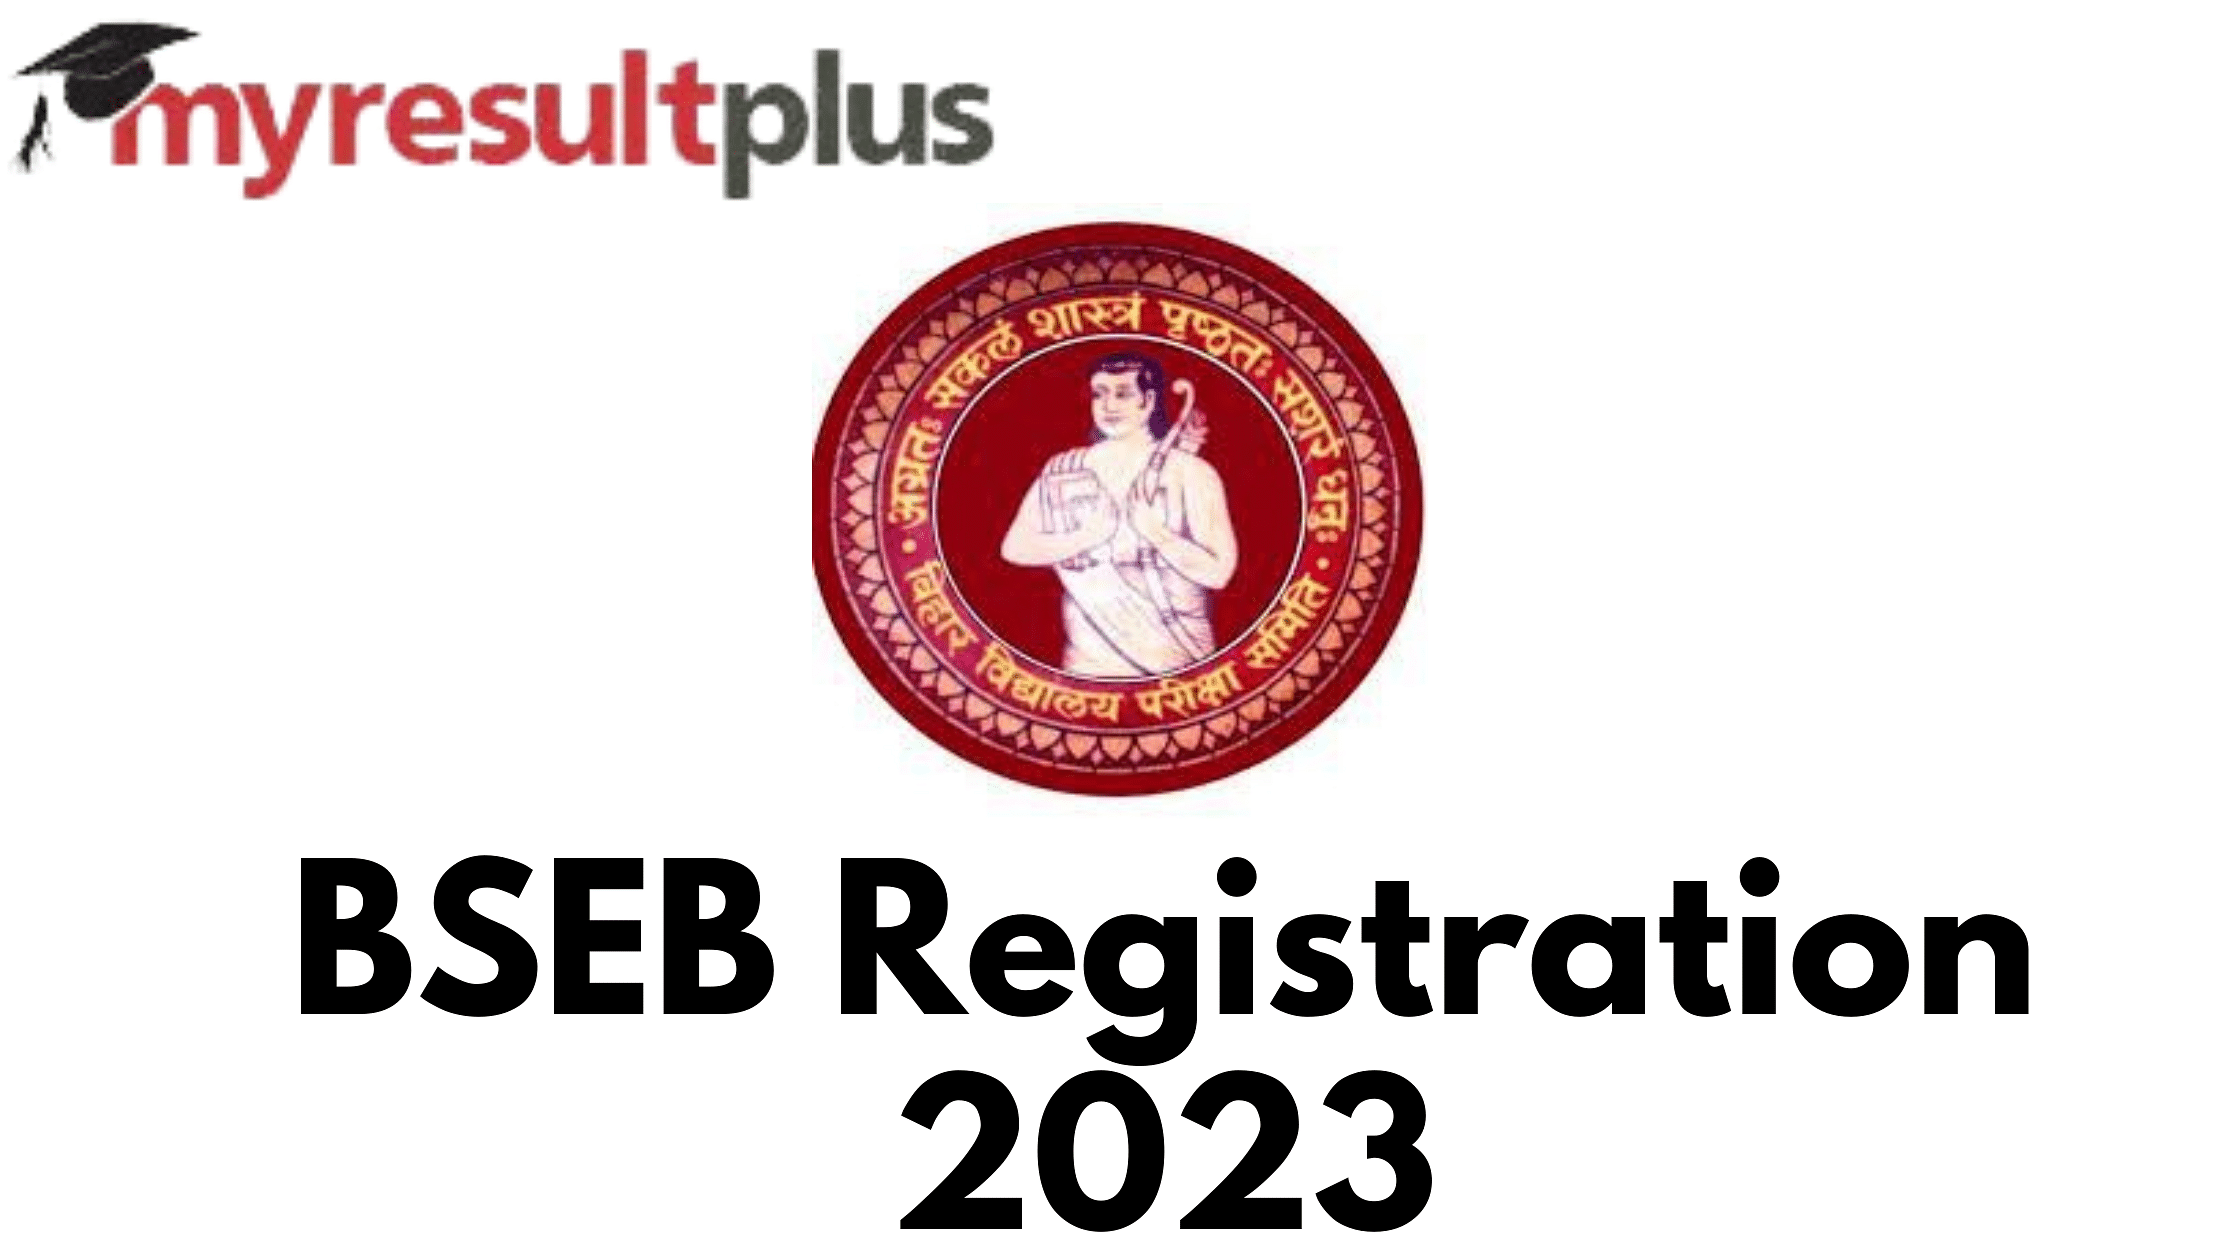 BSEB 2023 Registration Deadline For Class 10 and 12 Exams Extended, Know How to Apply Here